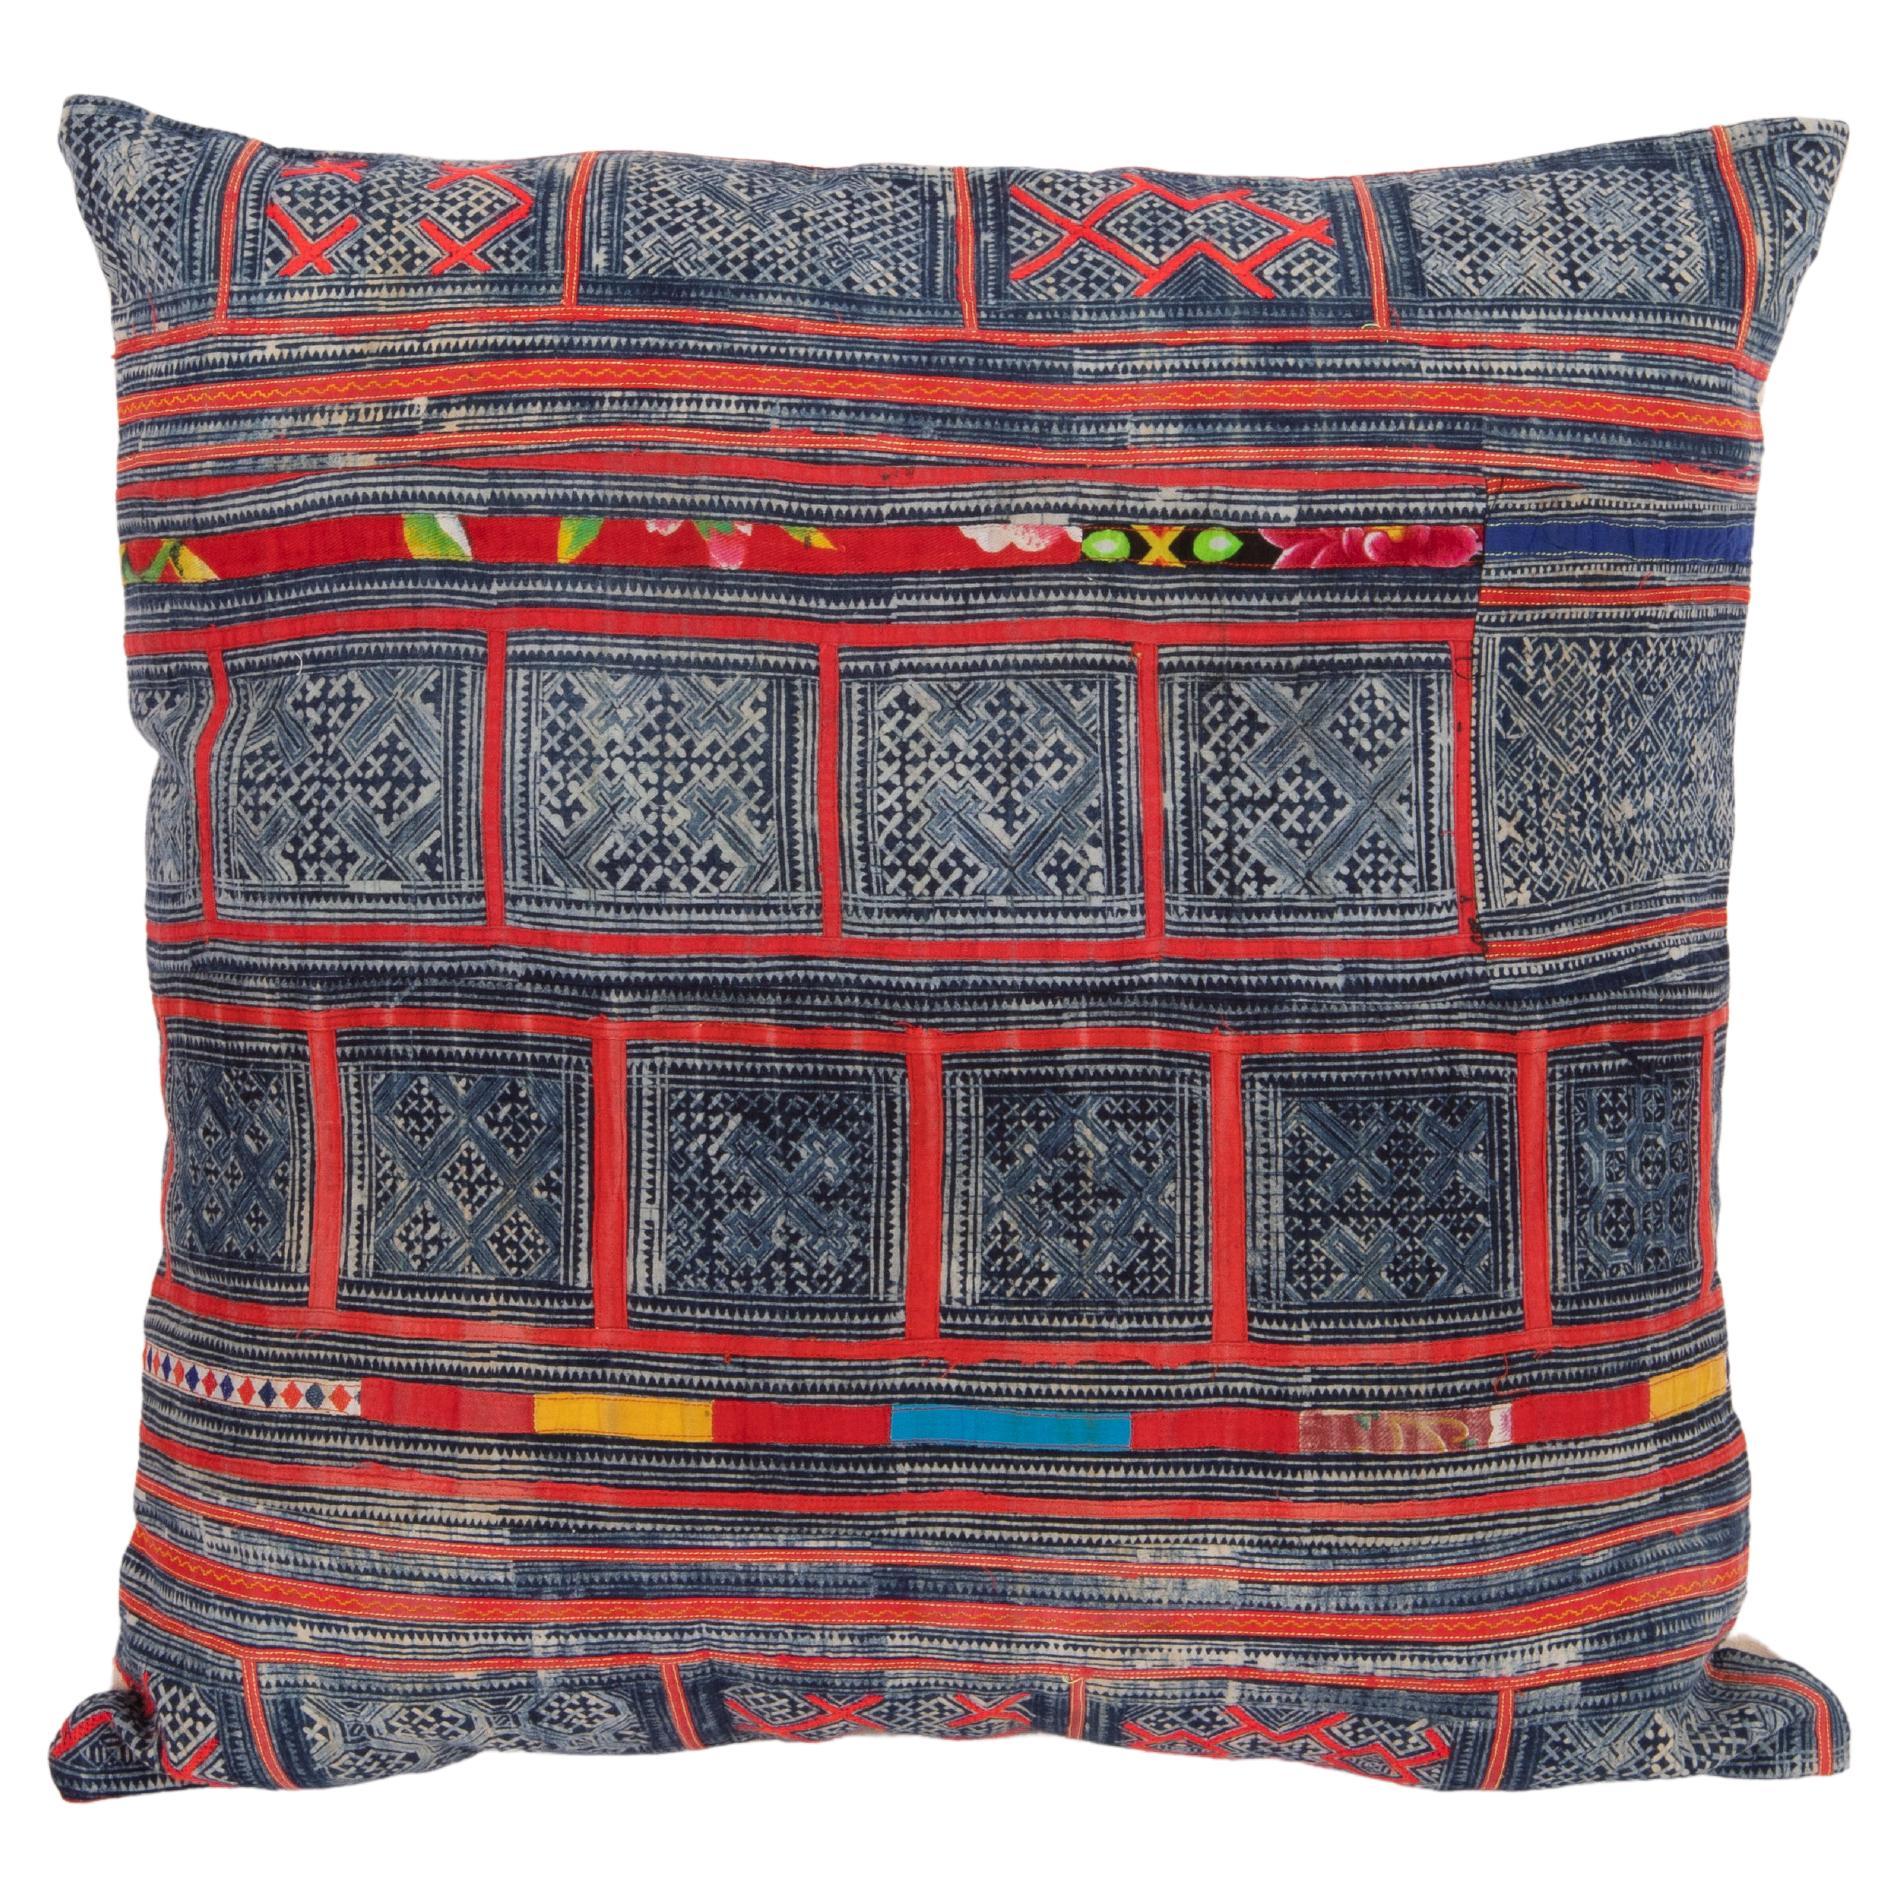 Pillow Case Made from Hmong Hill Tribe Batik Textile Mid 20th C